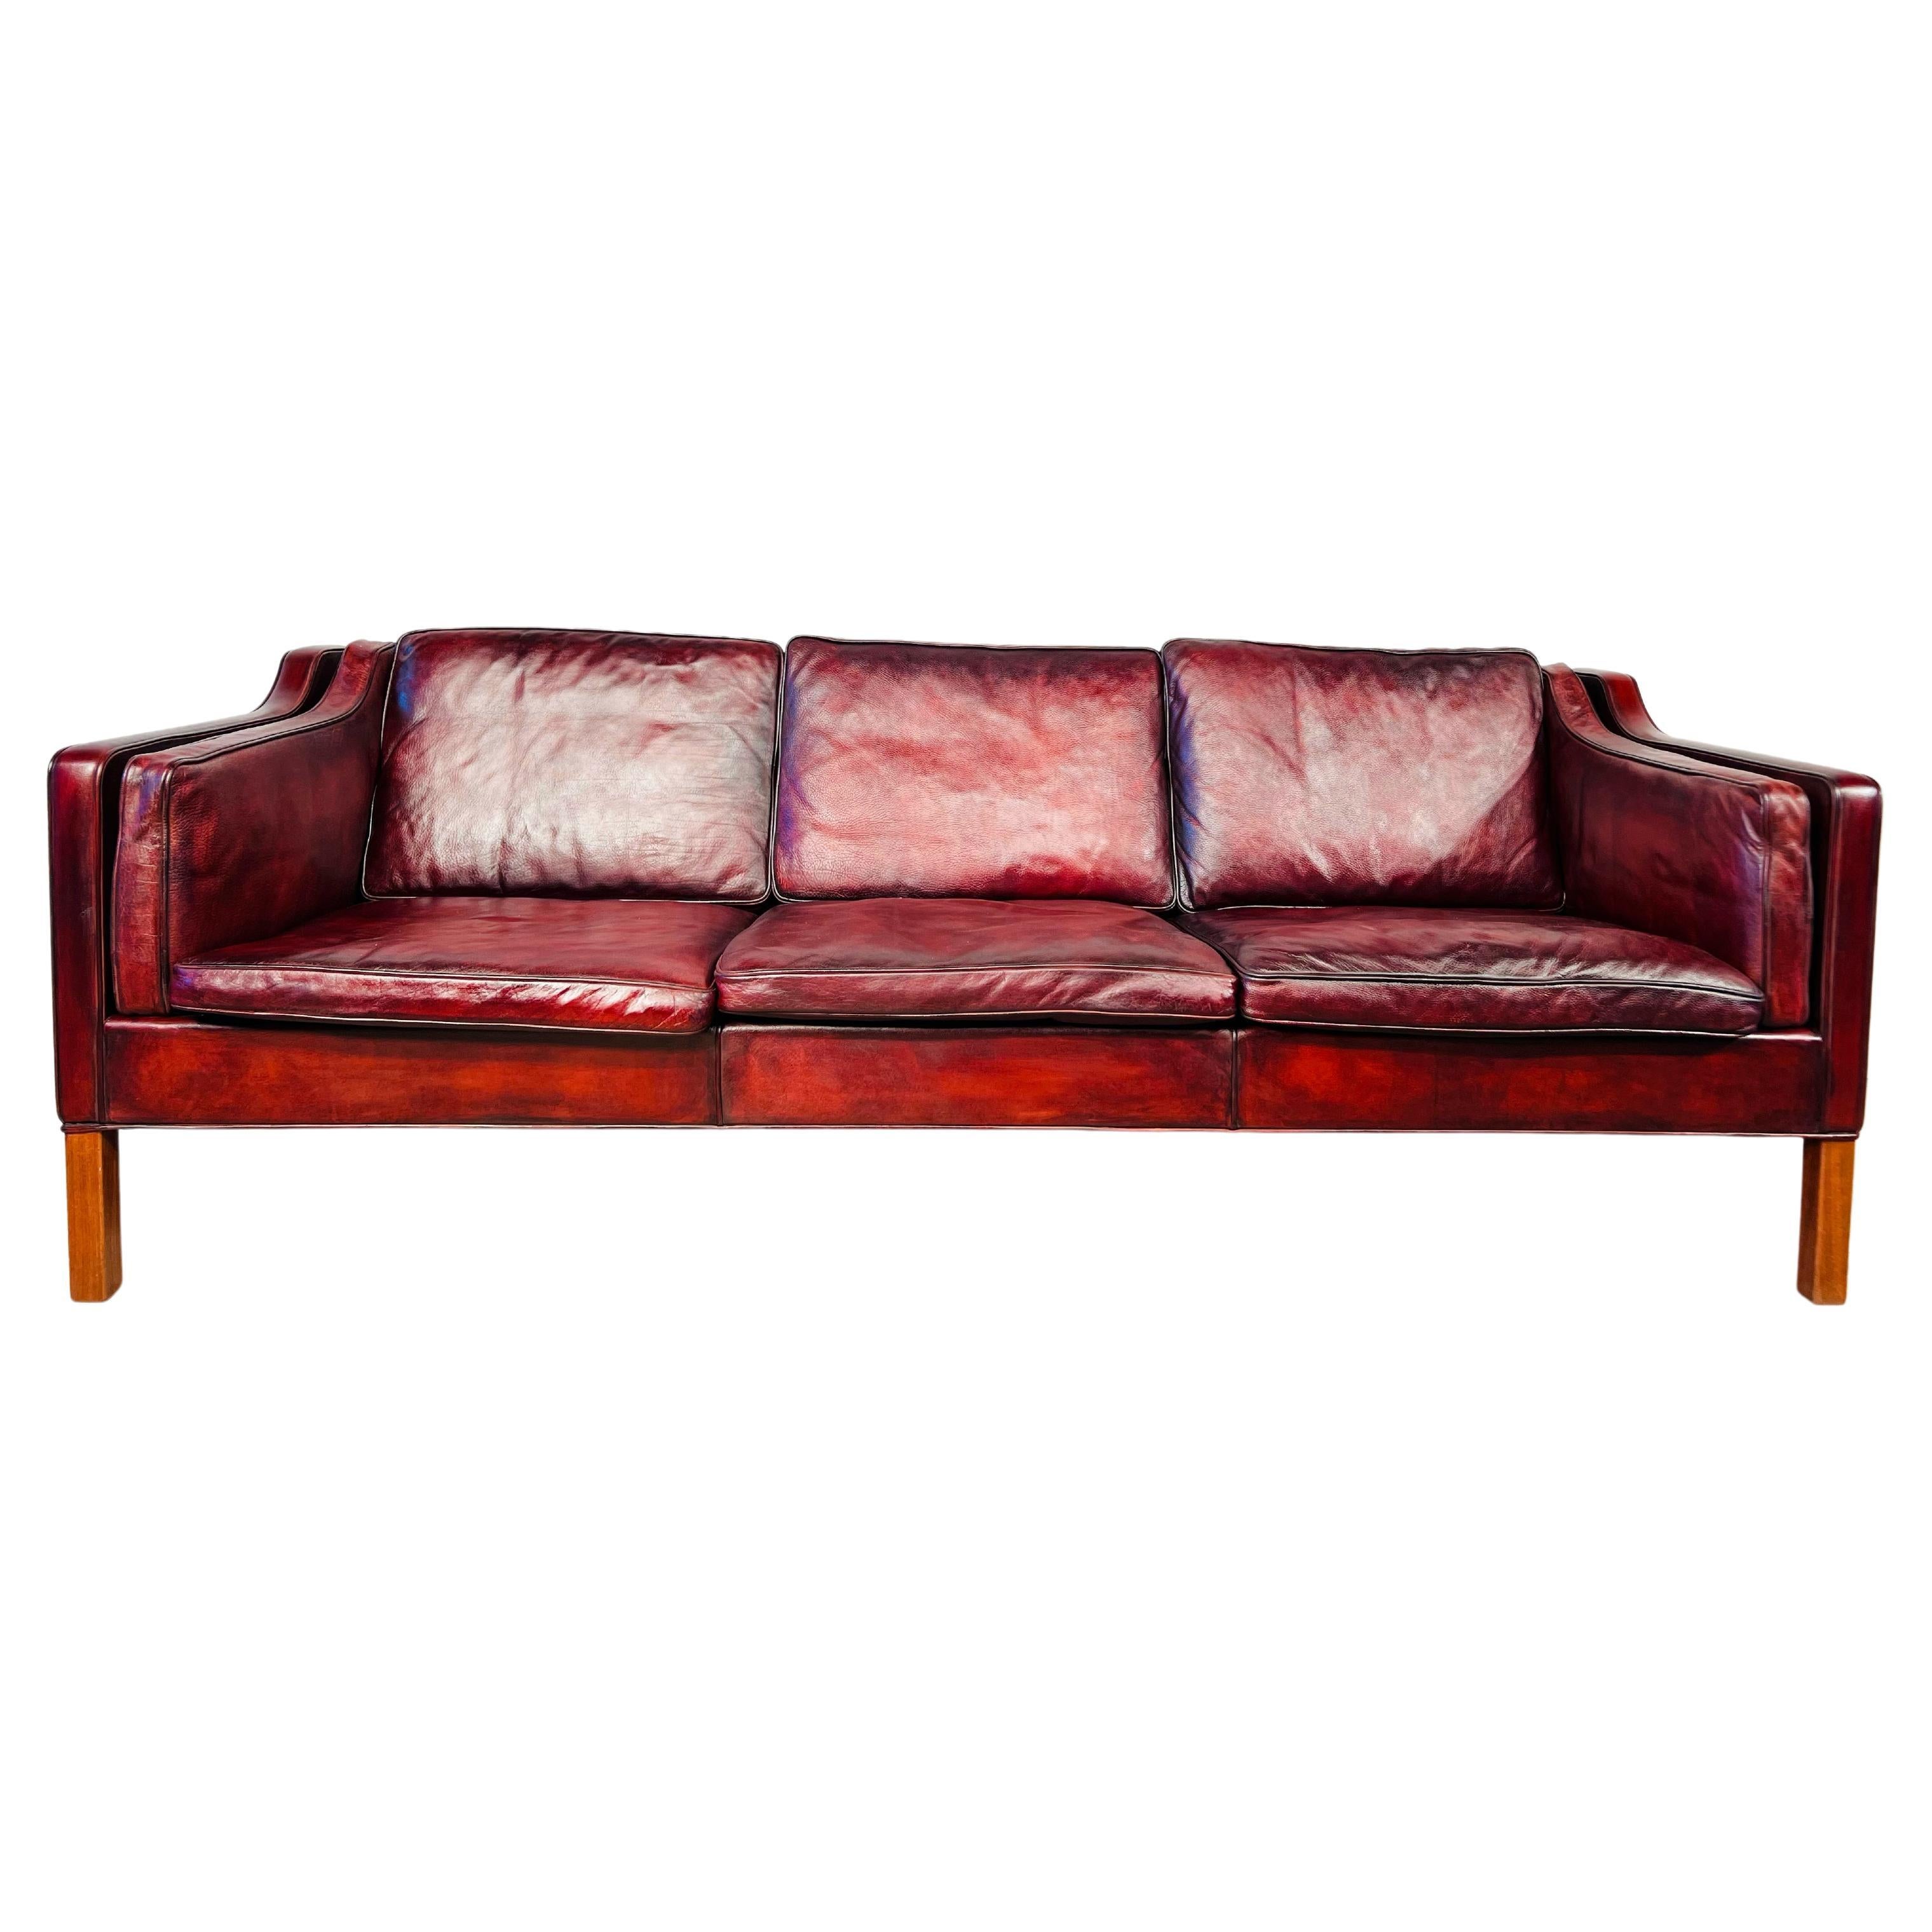 Borge Møgensen Model 2213 For Fredericia Danish Leather 3 Seater Deep Red #506